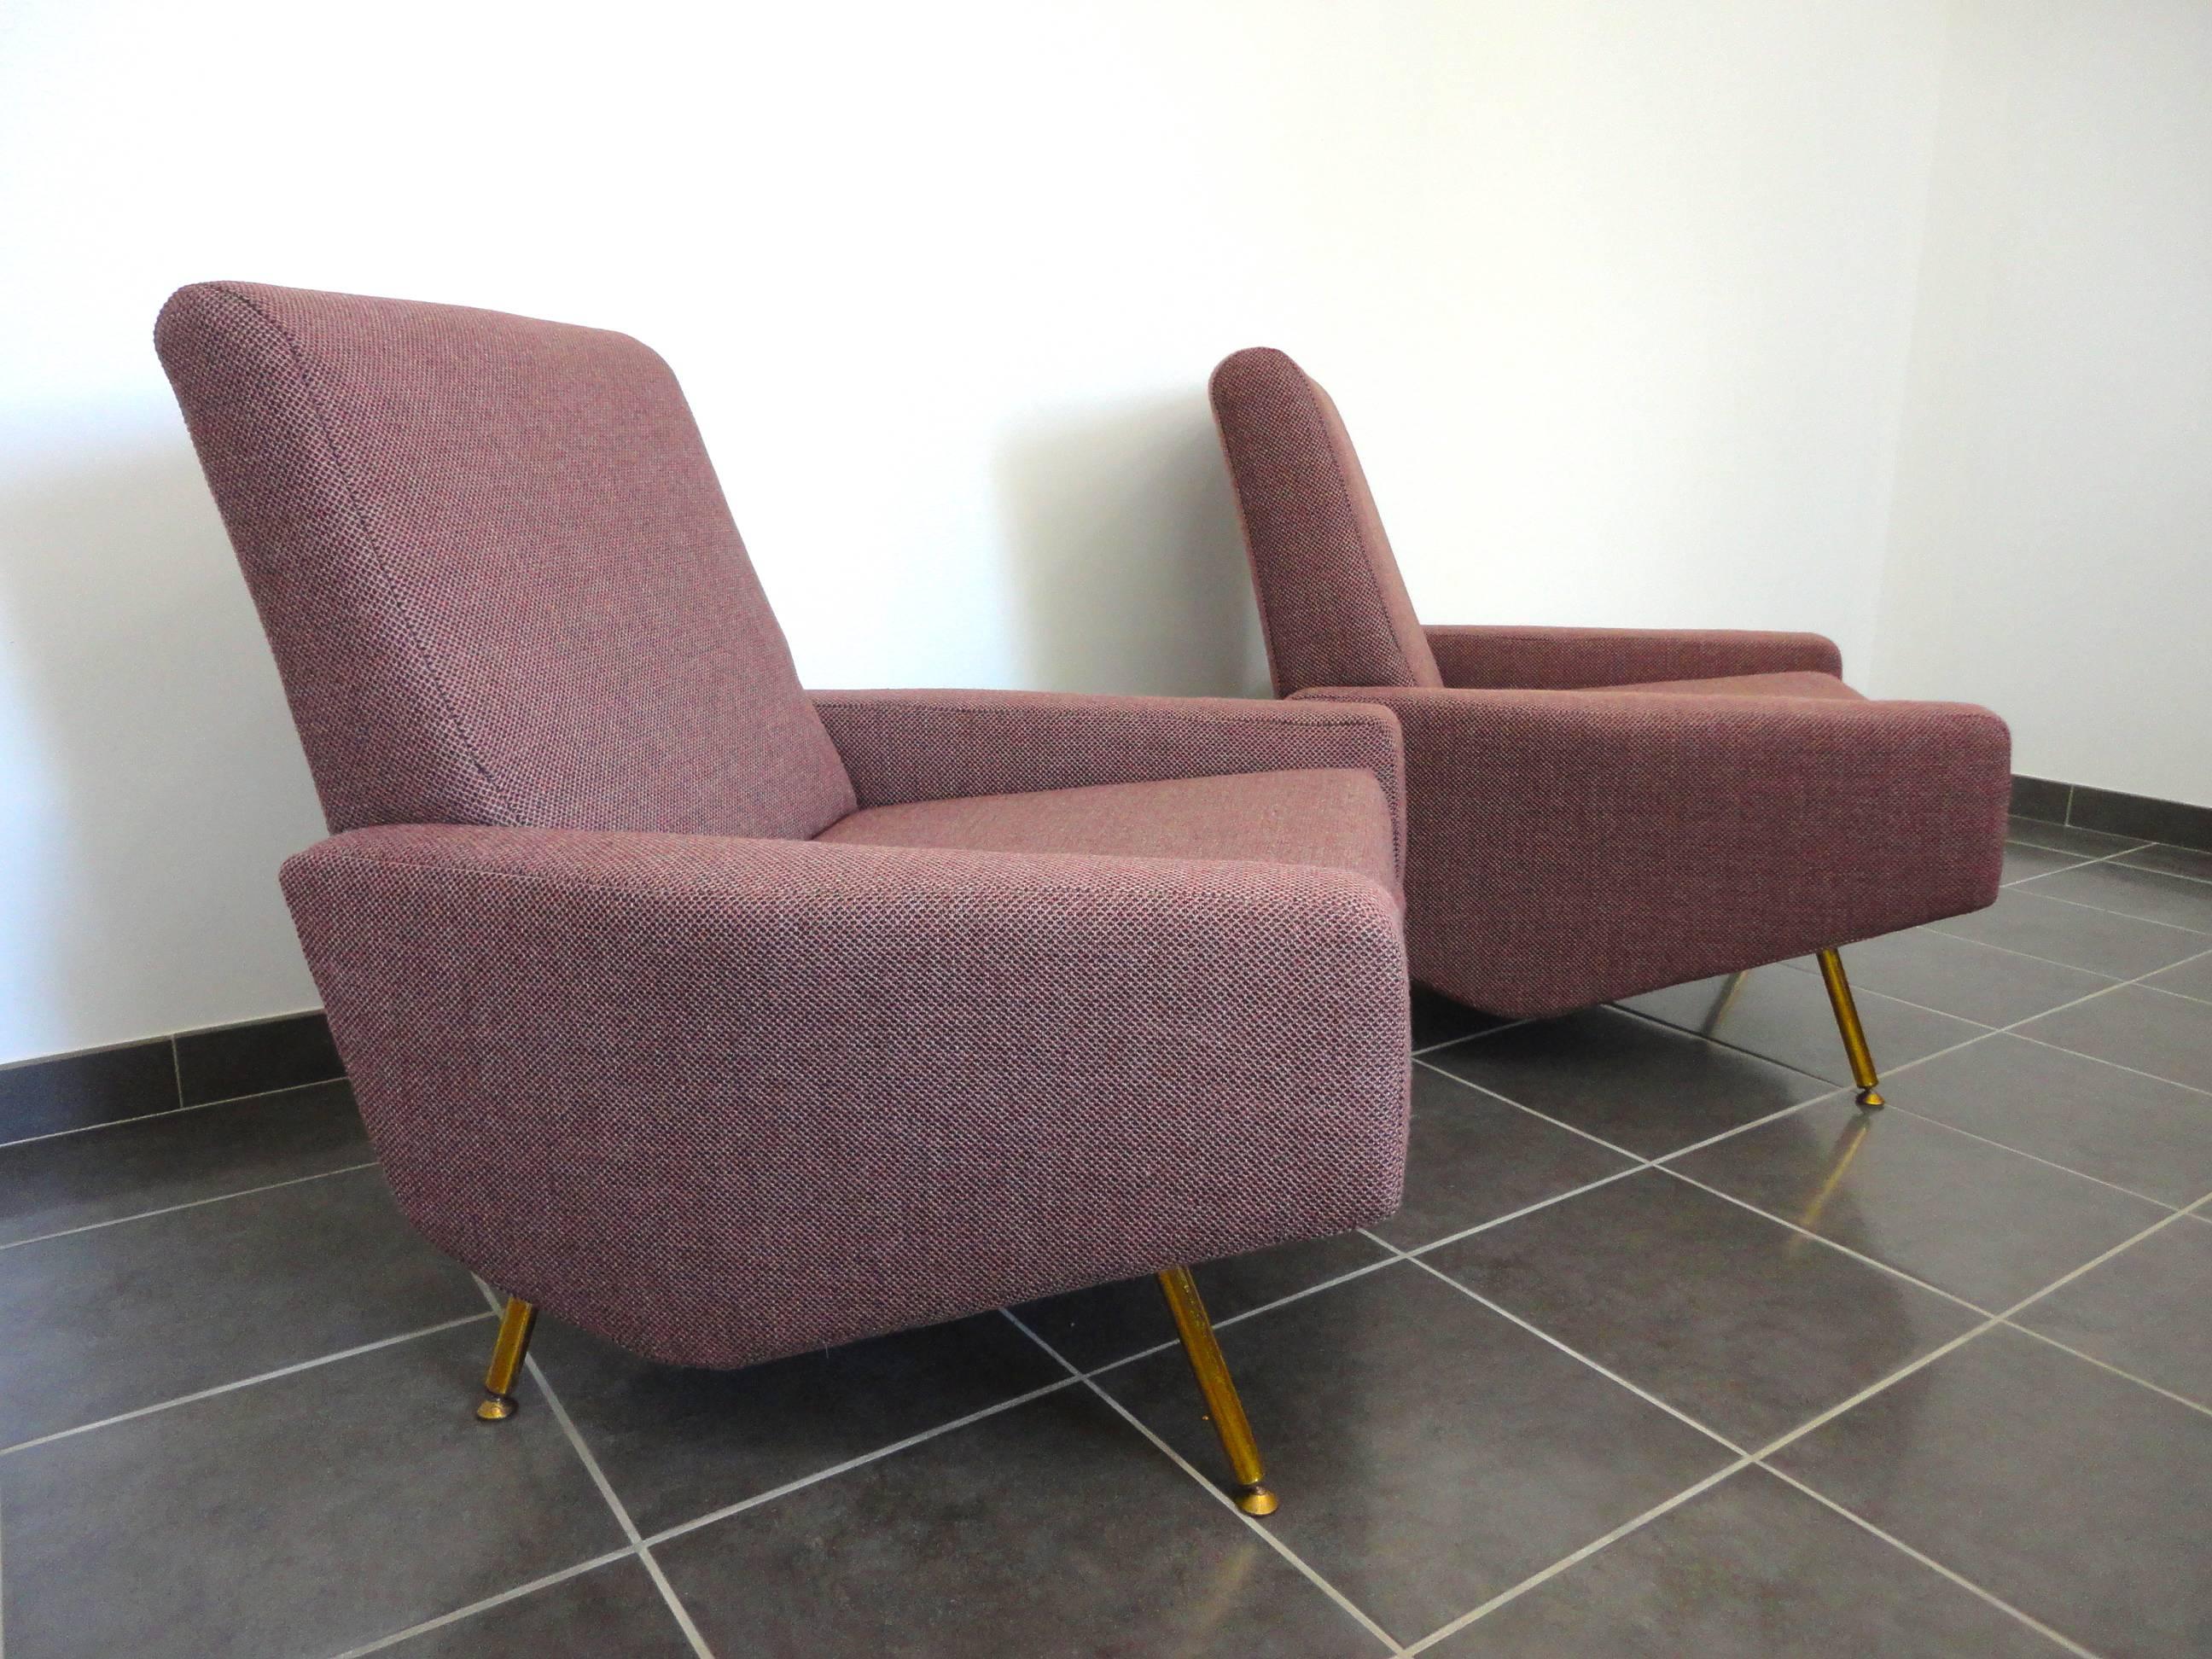 Pair of "Troika" lounge chairs by French editor Airborne. Those lounge chairs are reminiscent of Pierre Guariche's creations for the firm.
They have been fully restored and reupholstered with an old pink Skifer 3 Kvadrat fabric,
circa